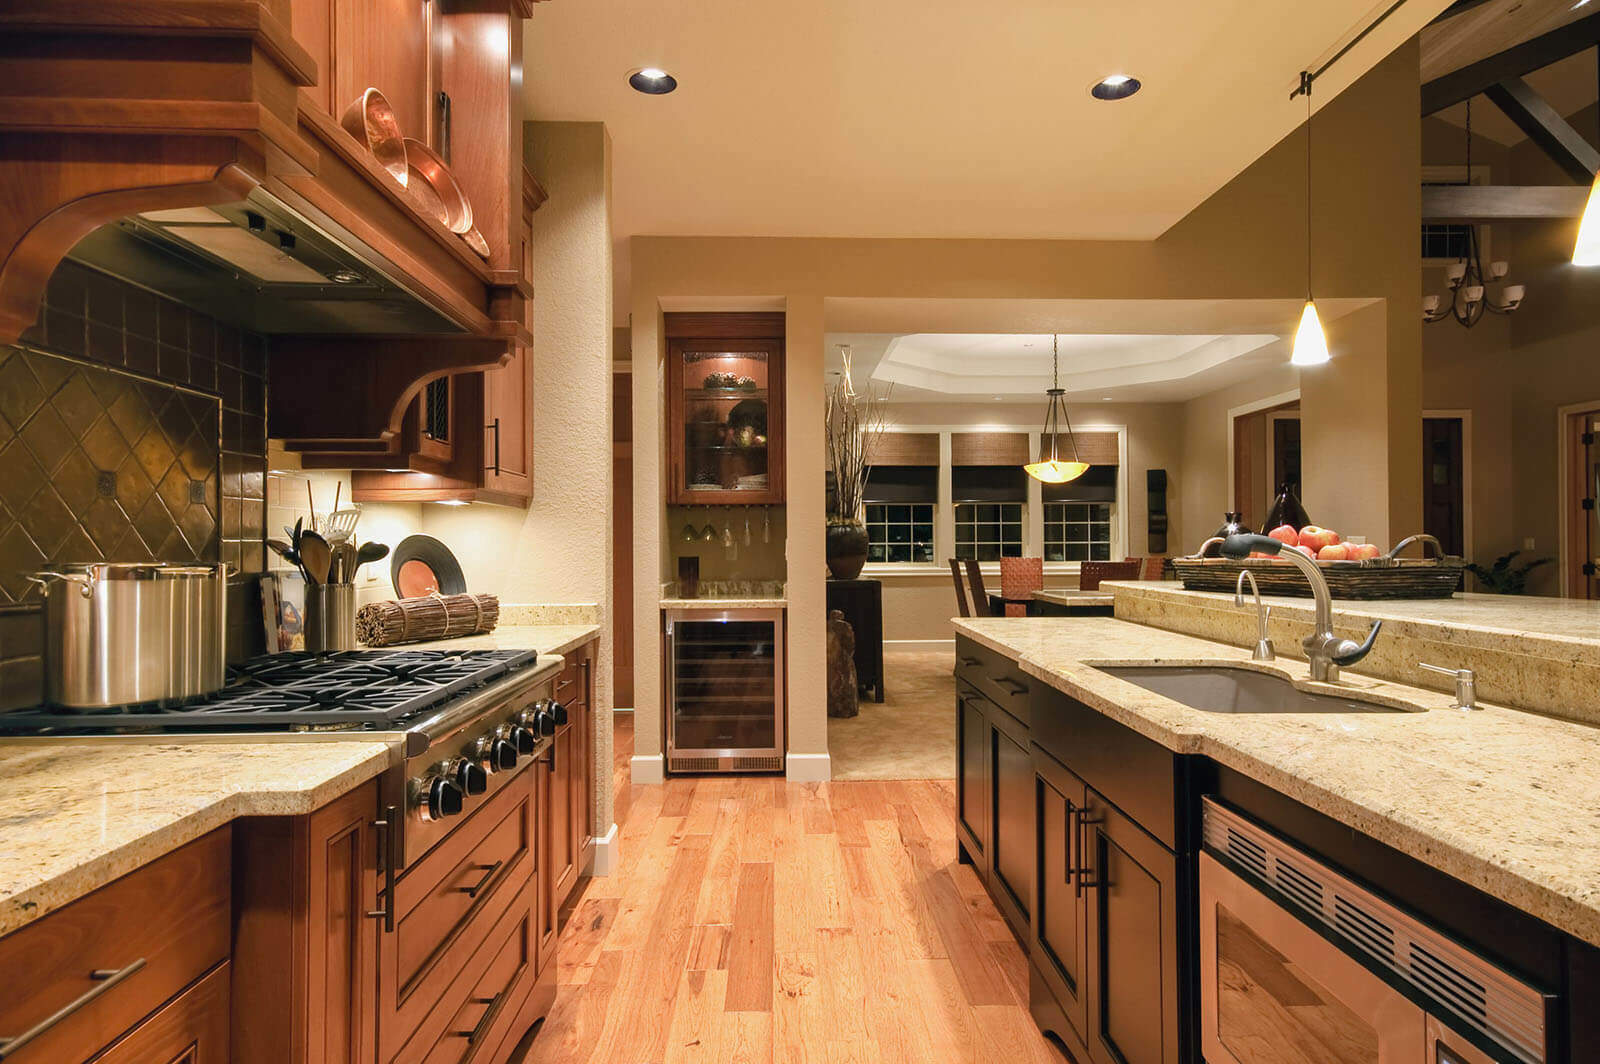  |  Which Items Are Splurge-Worthy For Your Kitchen Remodel